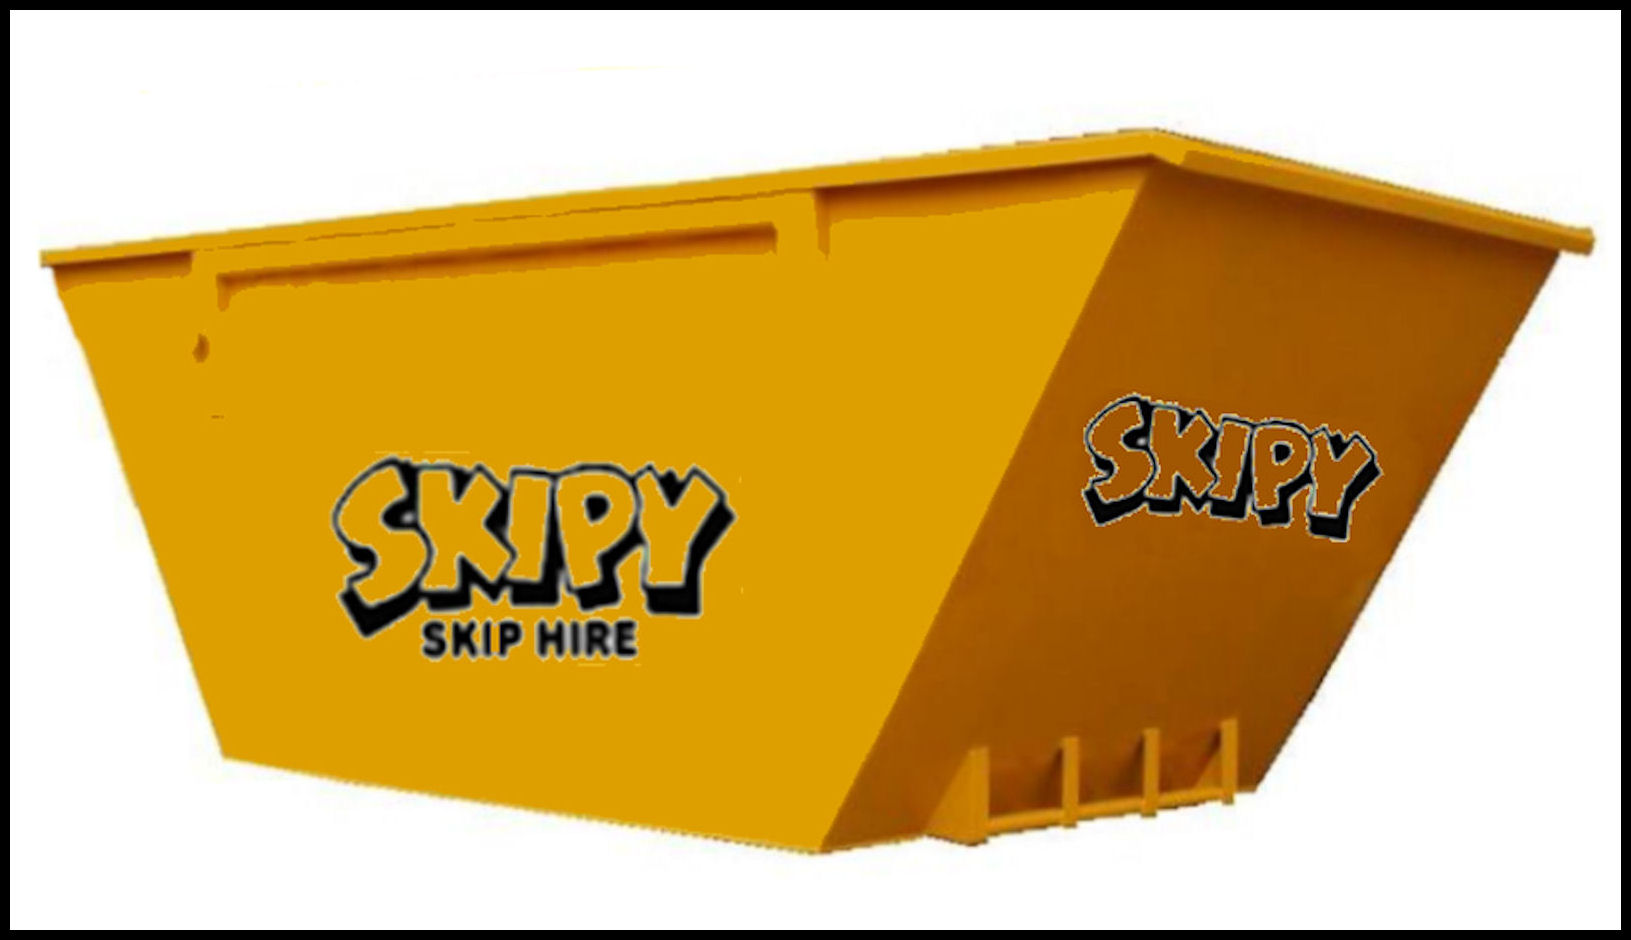 An example of one of our Builders/Maxi skips